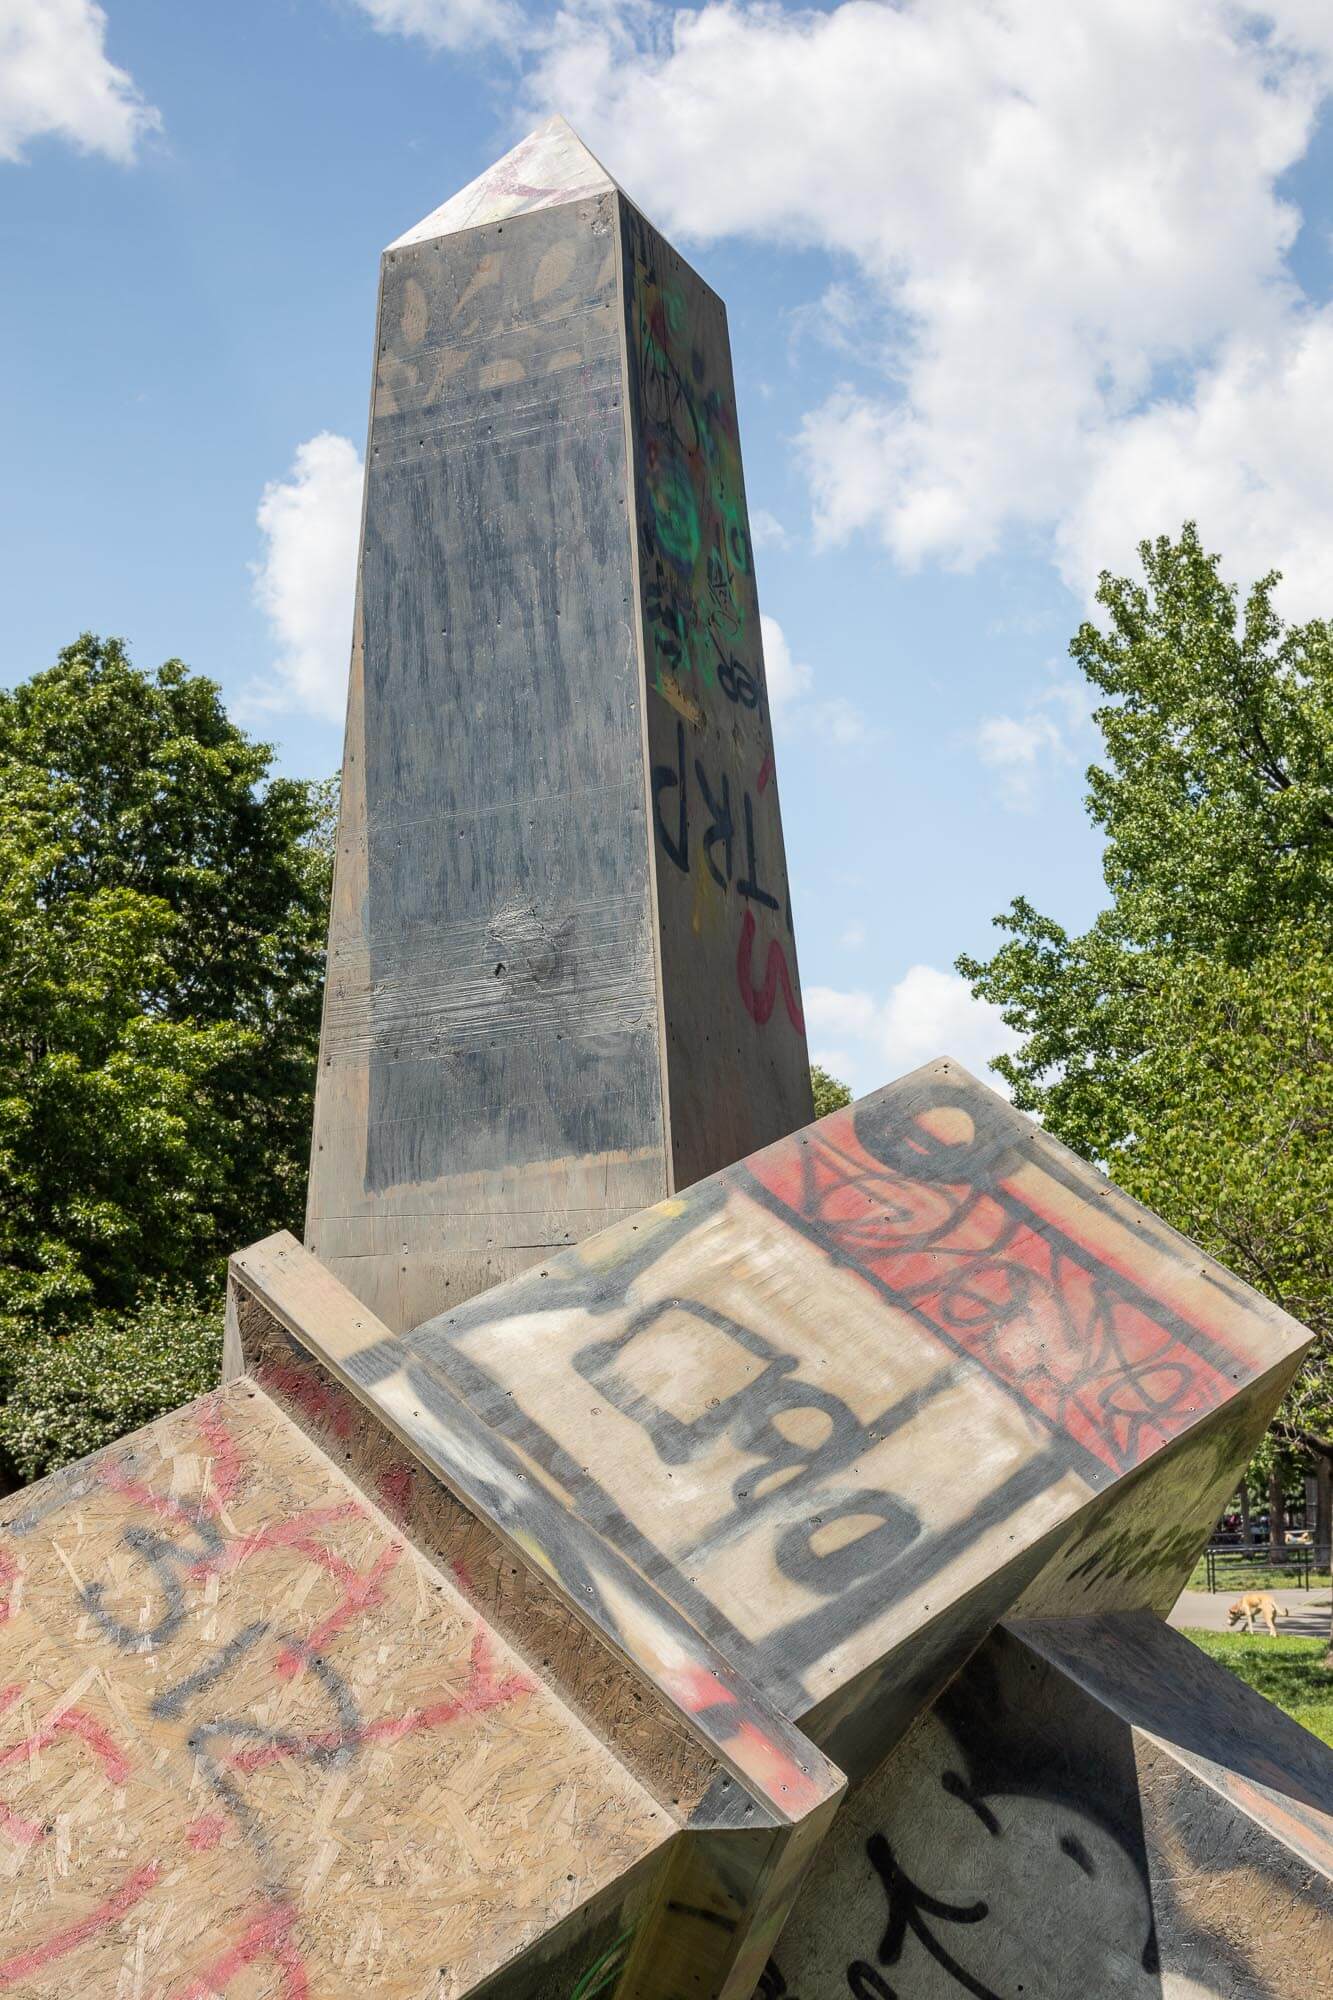 an abstract, graffiti-covered monument made from plywood in a park